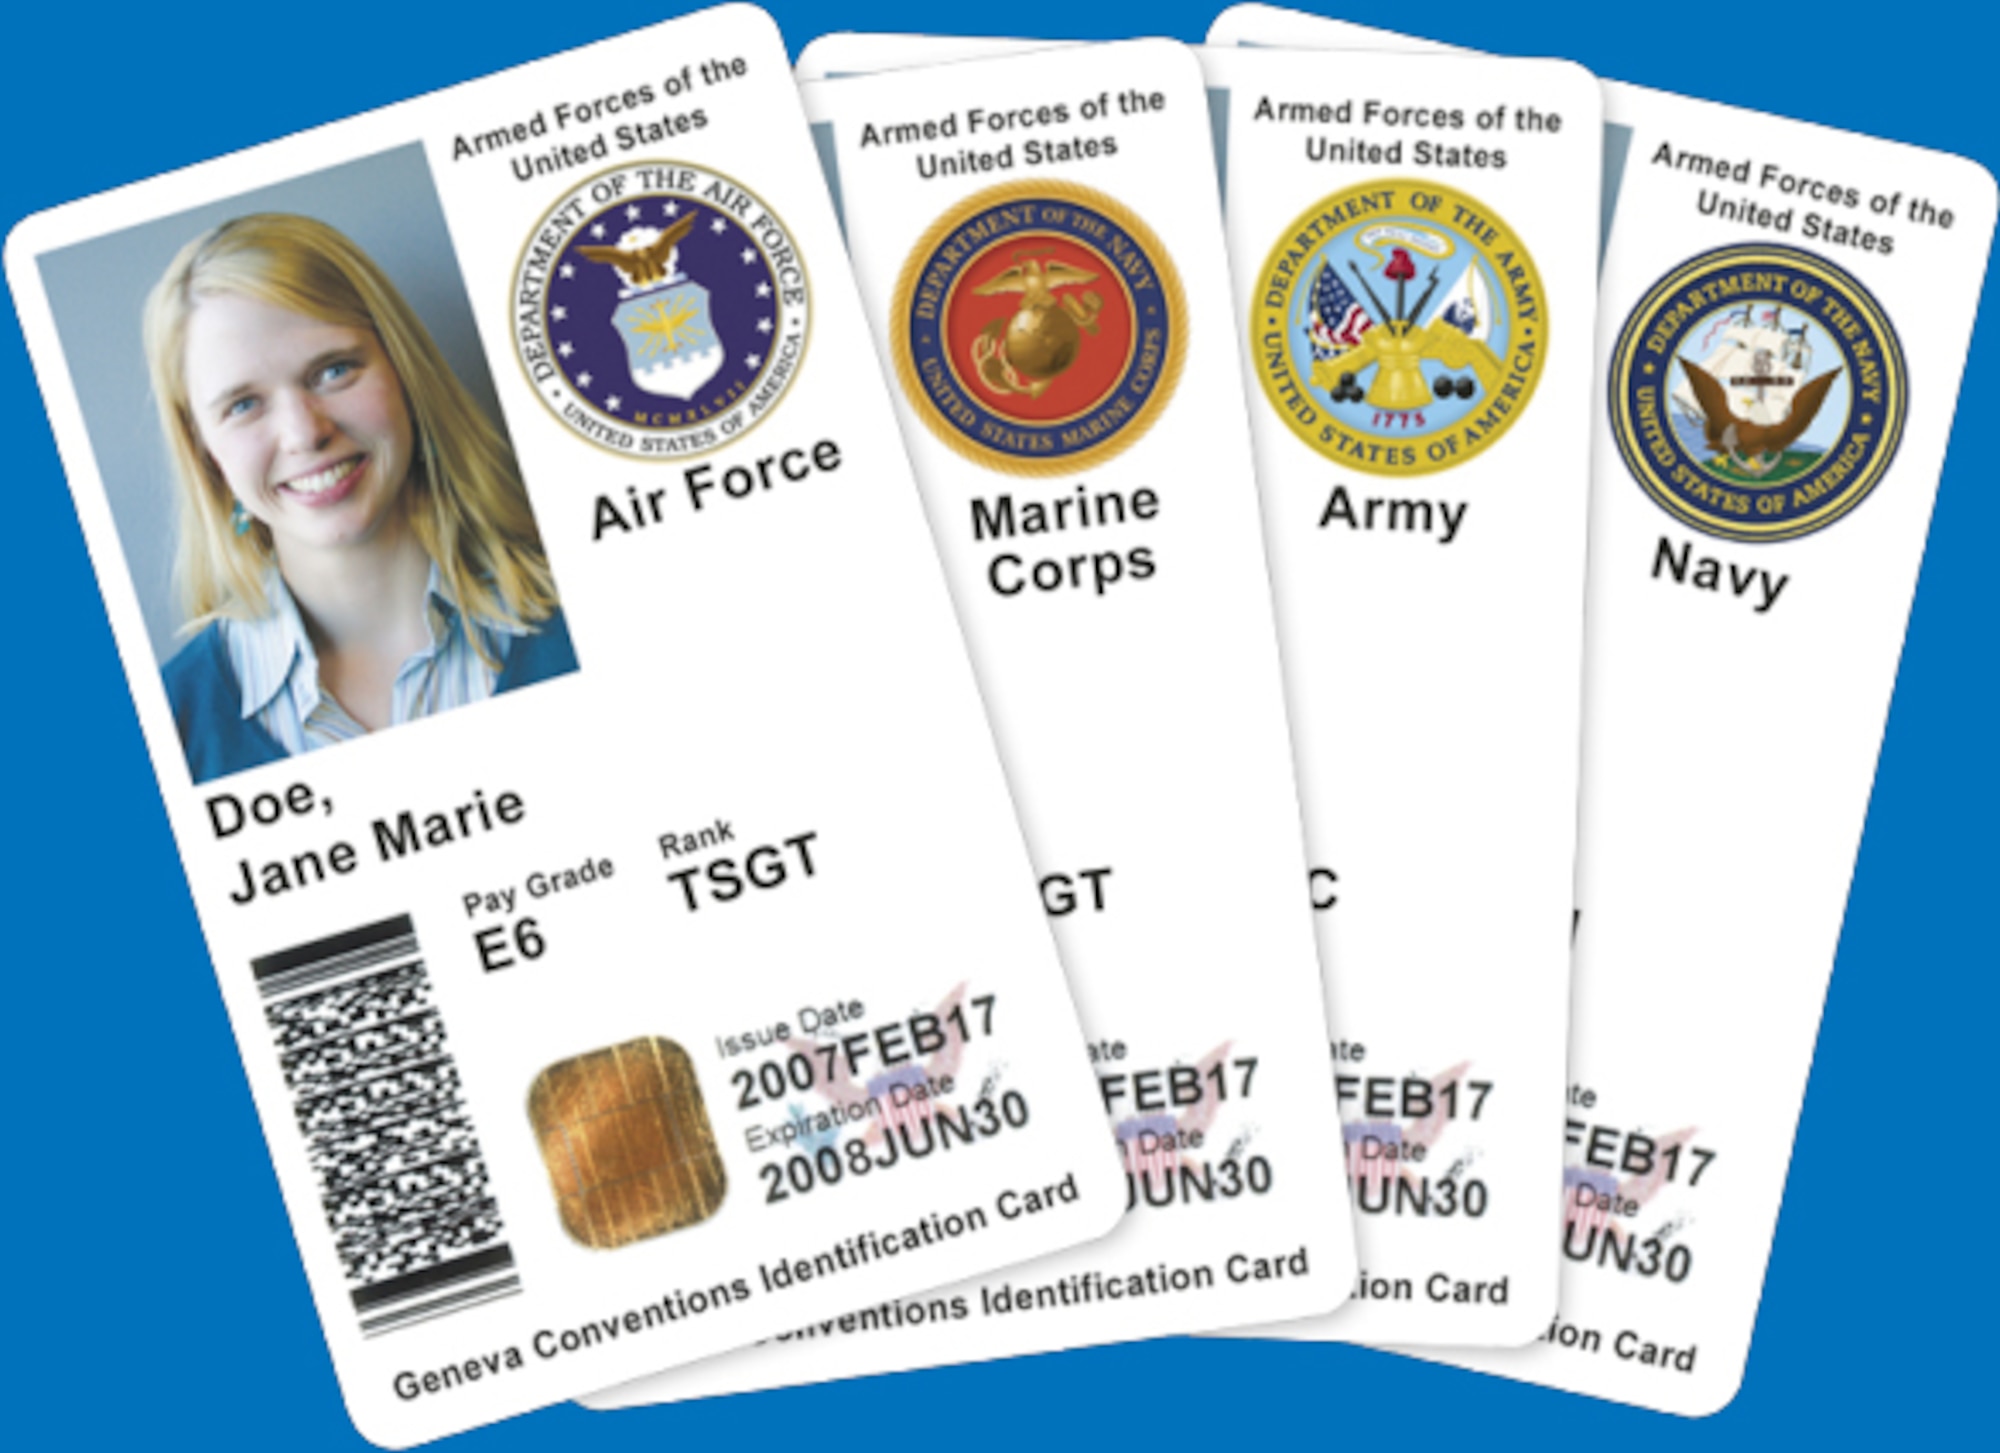 4 common access cards arranged upon a blue background showing the 4 service branches at the top right of each card.